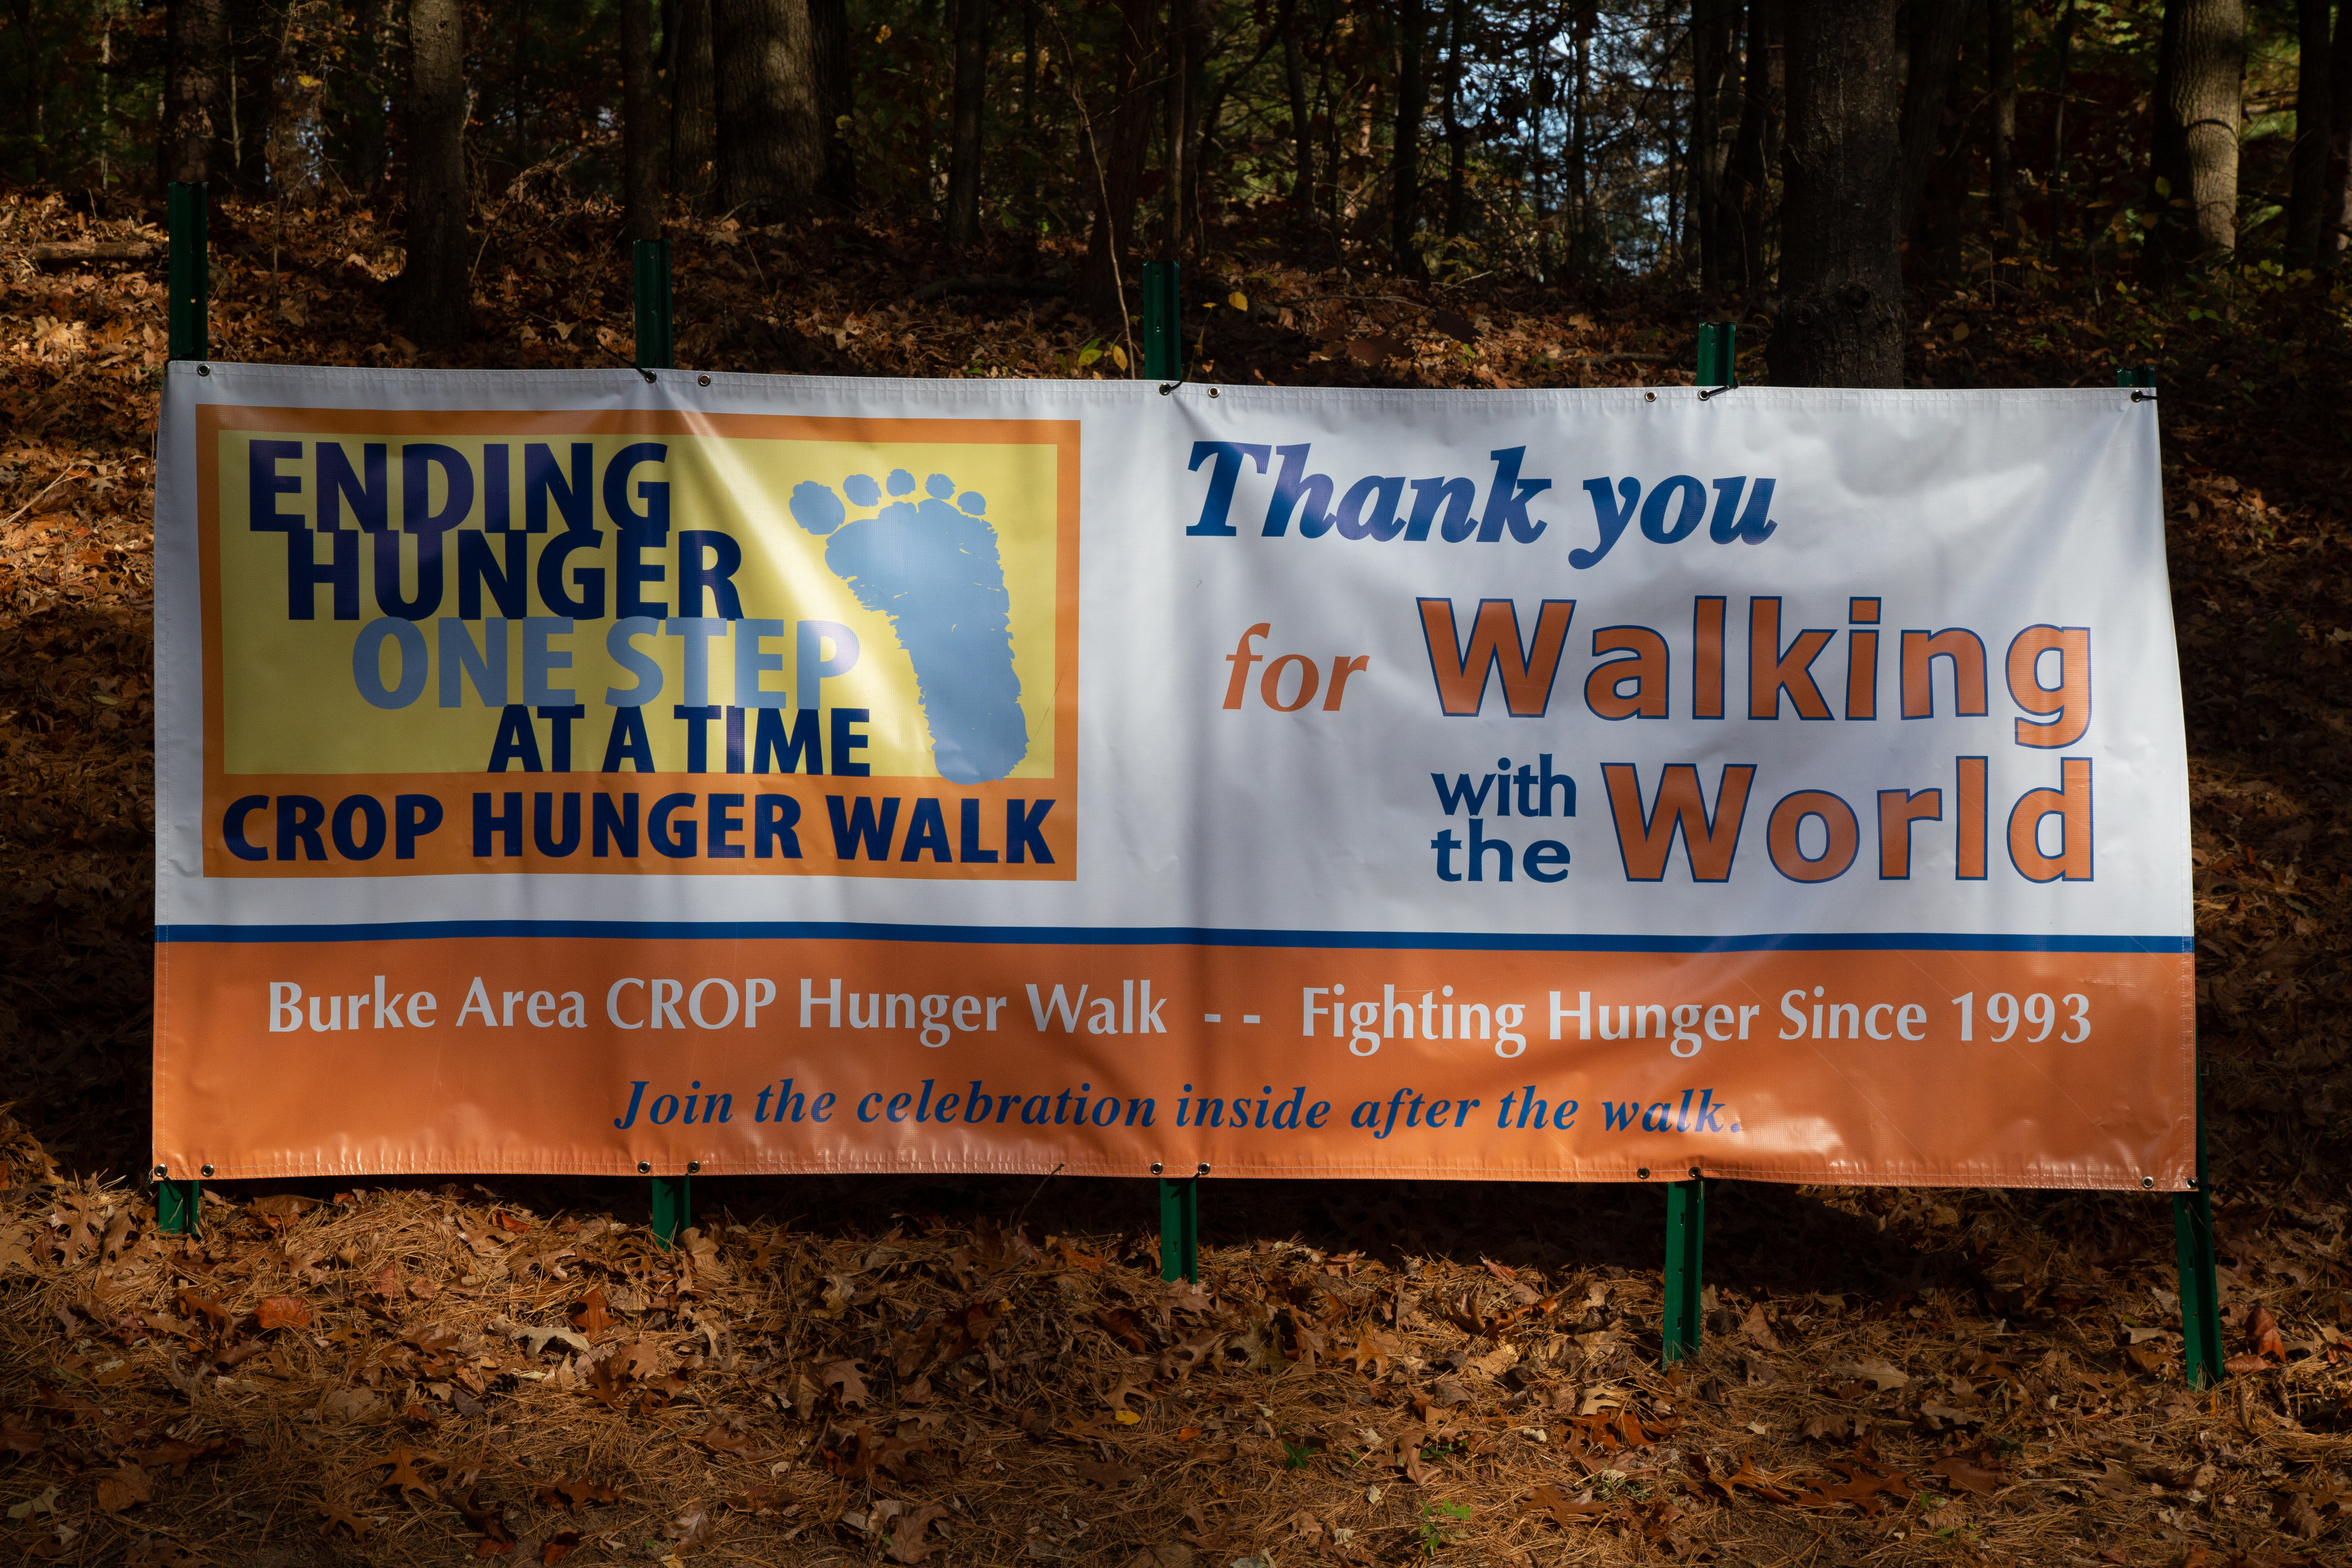 Ending Hunger One Step at a Time. Crop Hunger Walk. Thank you for Walking with the World. Burke Area CROP Hunger Walk - - Fighting Hunger since 1993. Join the celebration inside after the walk.